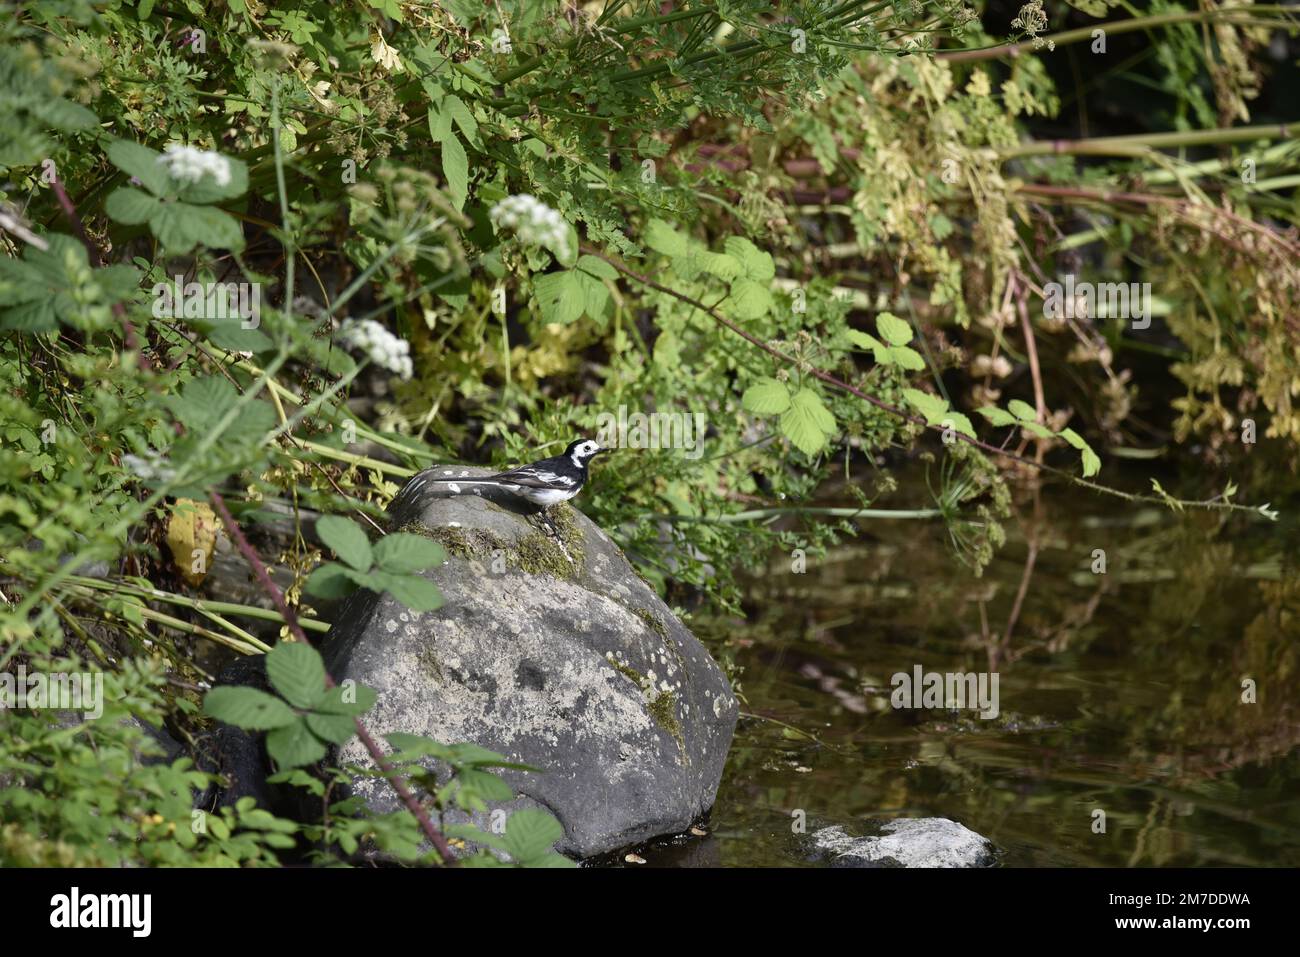 Pied Wagtail (Motacilla alba) Perched in Right-Profile on Top of a Boulder Left of Image, Looking Across River Rhiw Tributary in July in Wales, UK Stock Photo